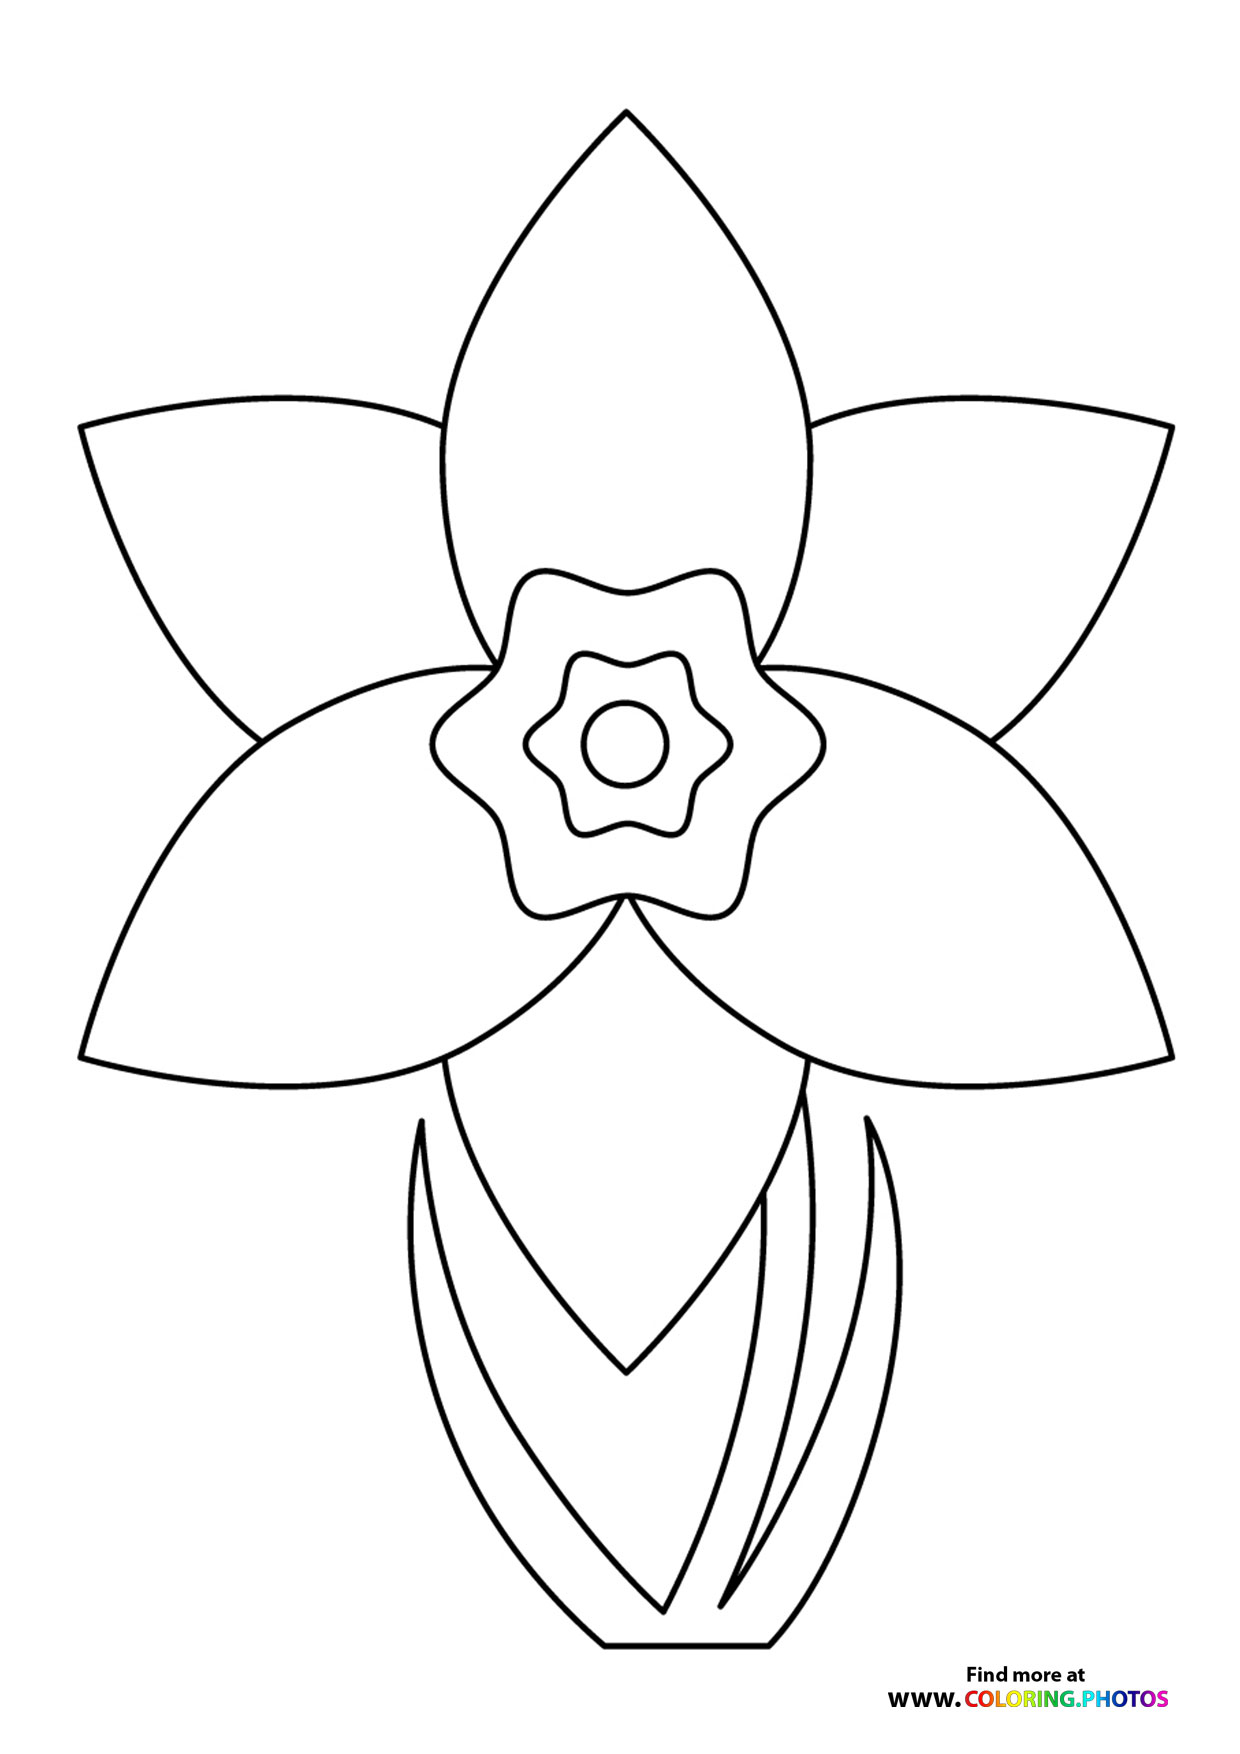 Easter Daffodil - Coloring Pages for kids